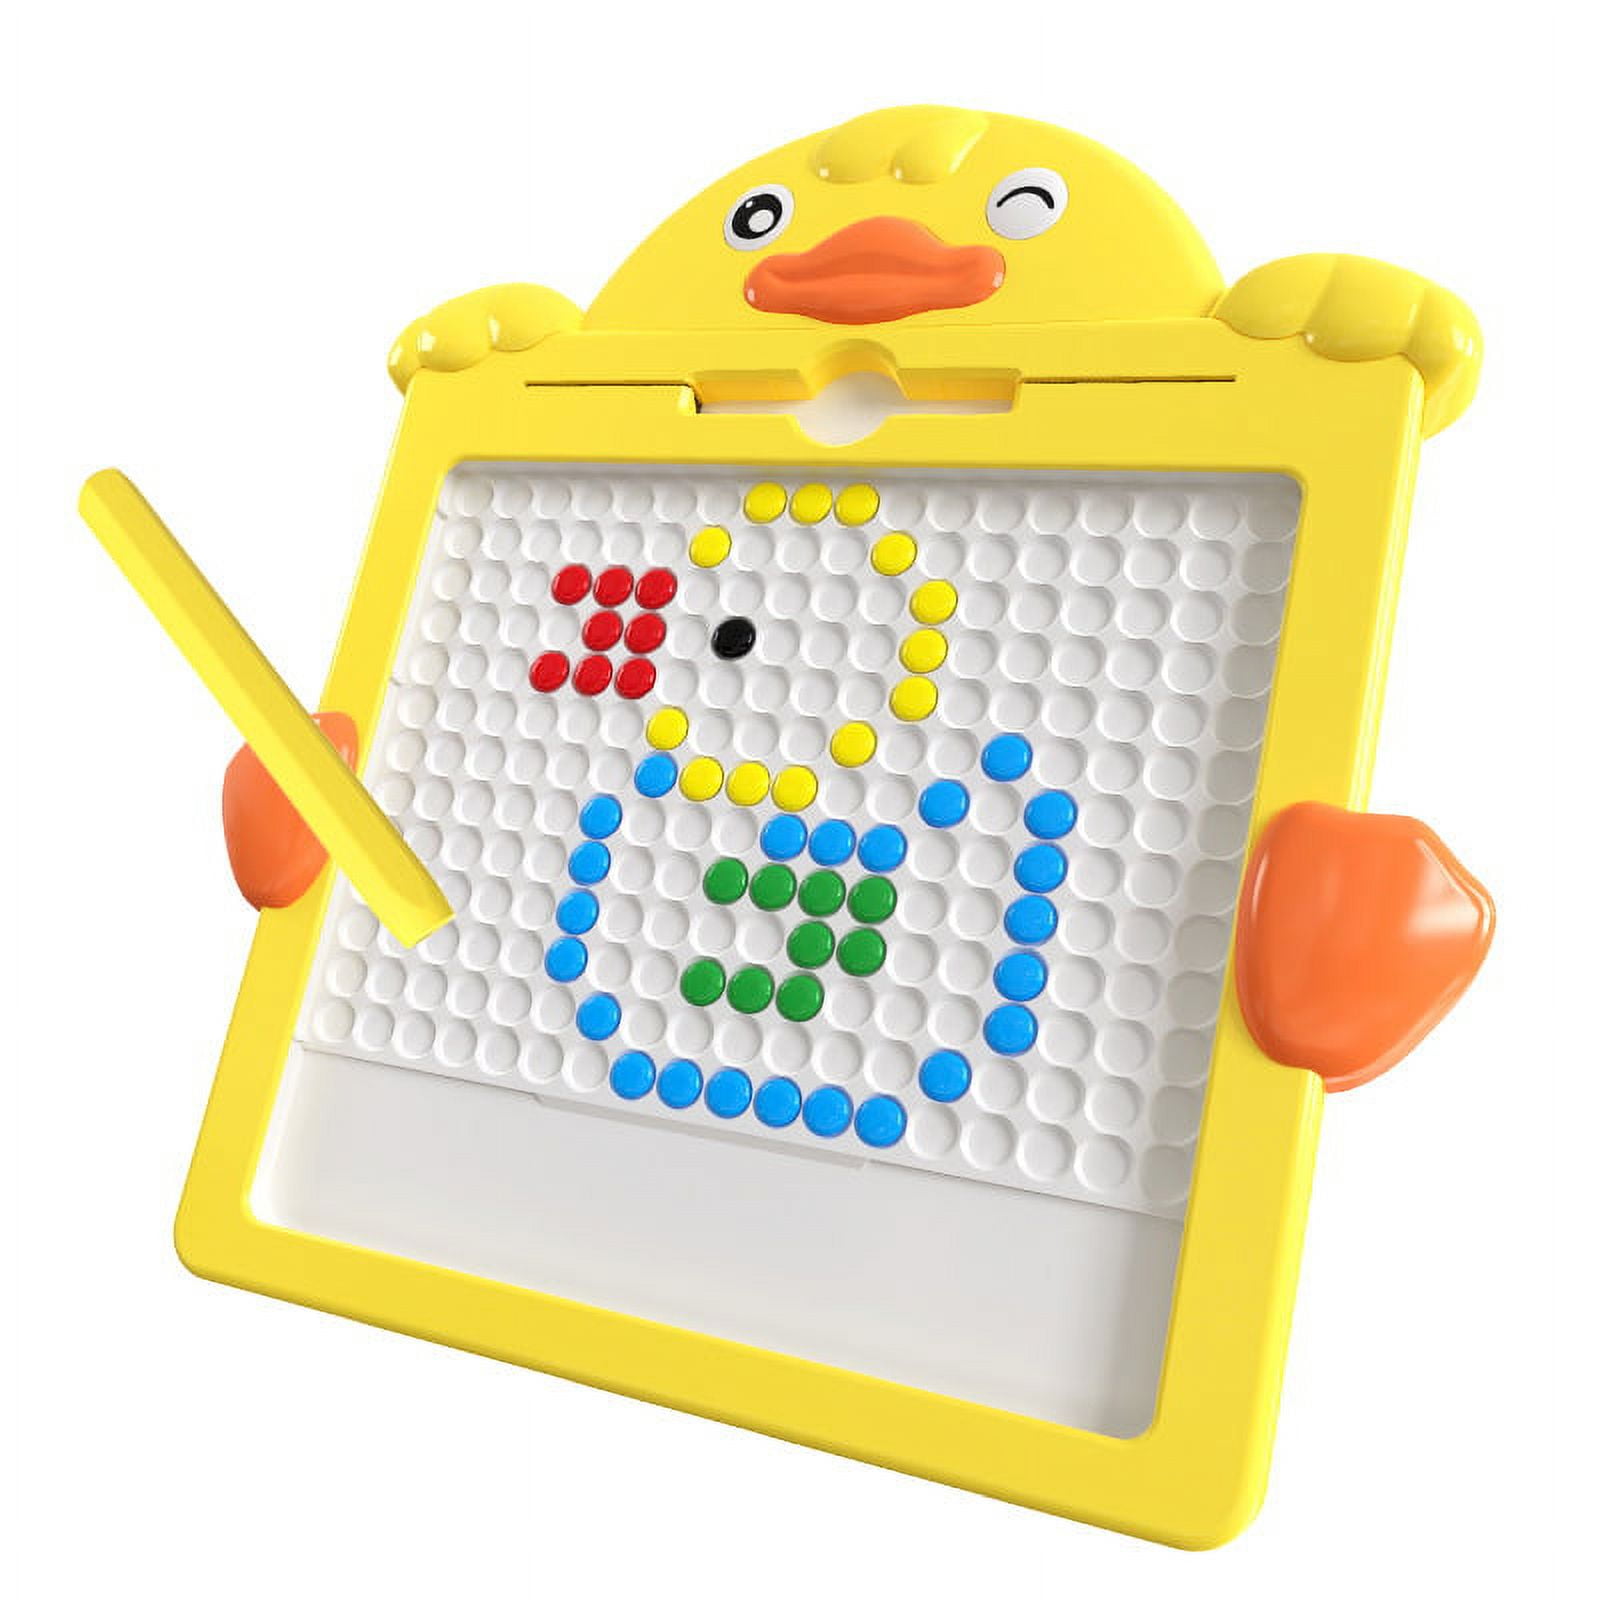 Toddler Toys, Magnetic Drawing Board,Kids Toys for 1-3 Year Old Girls Boys  Green